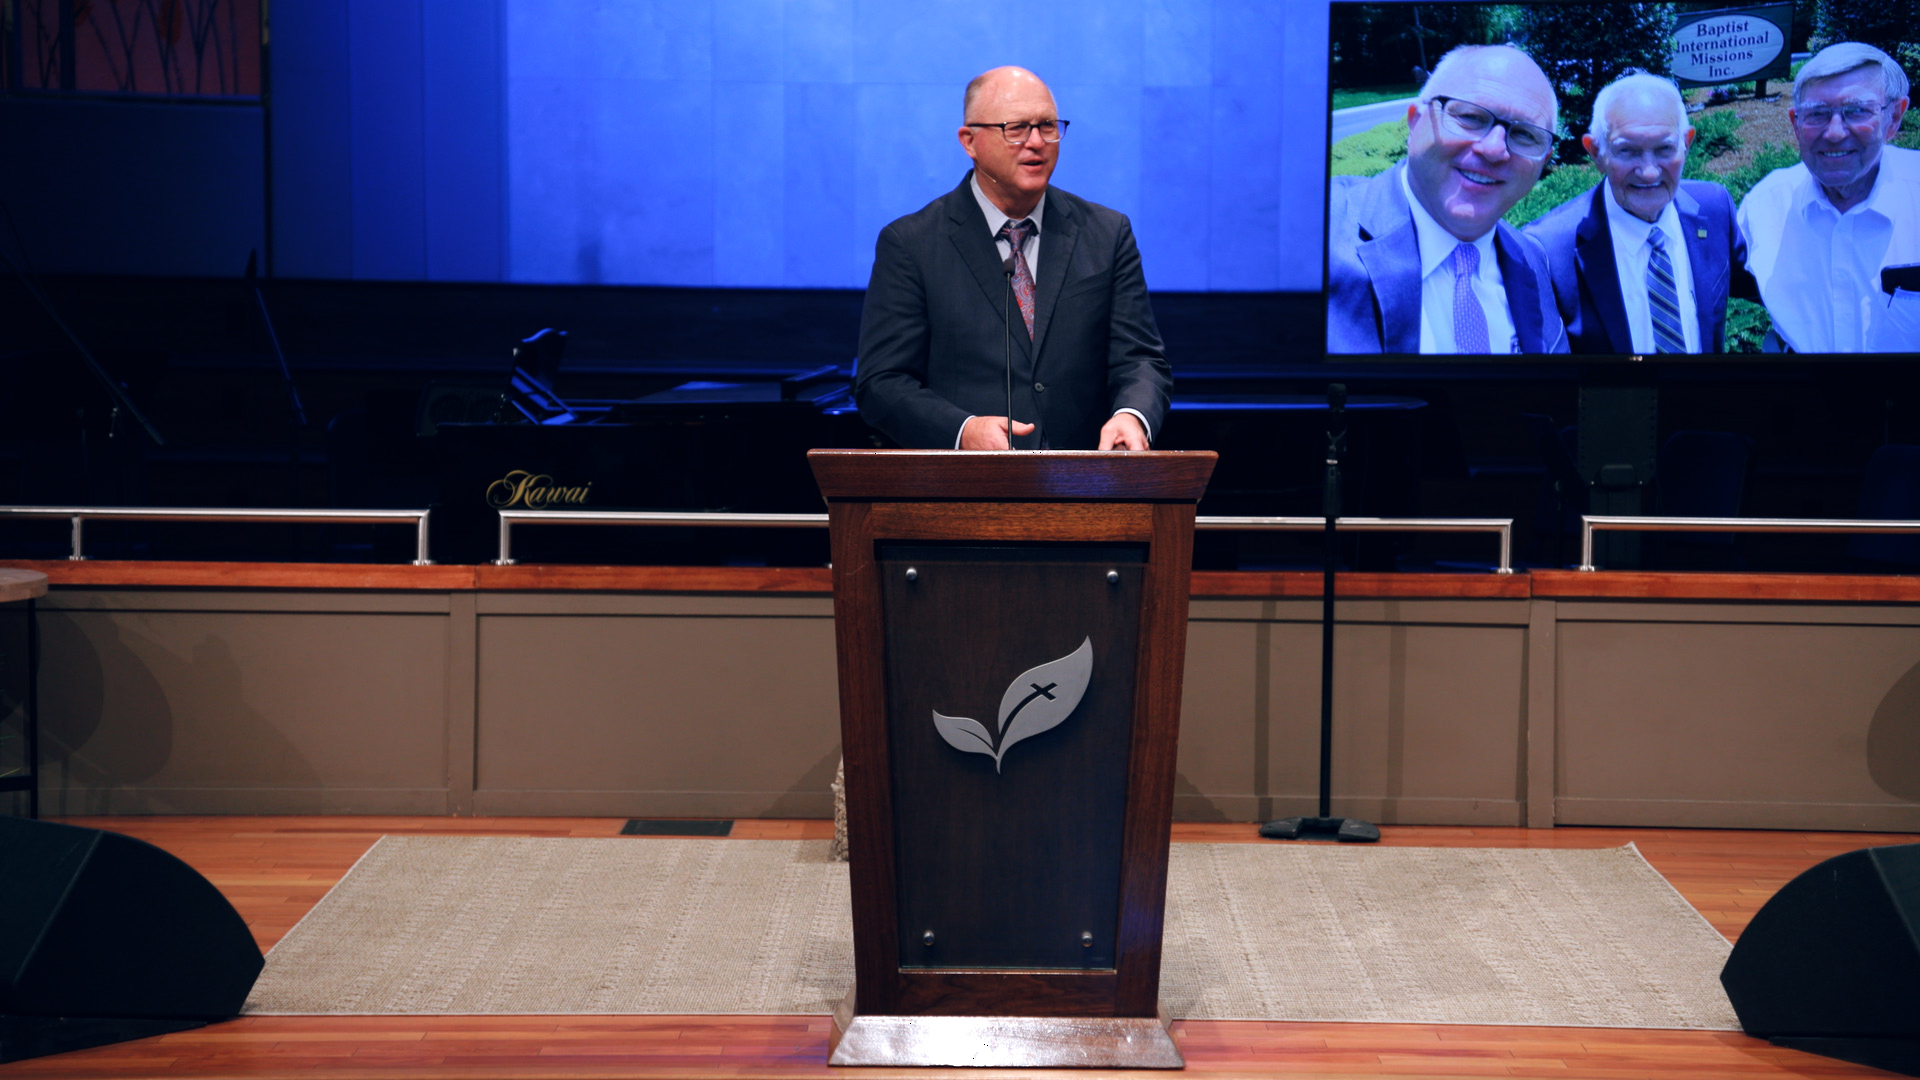 Pastor Paul Chappell: Encouraged In The Lord